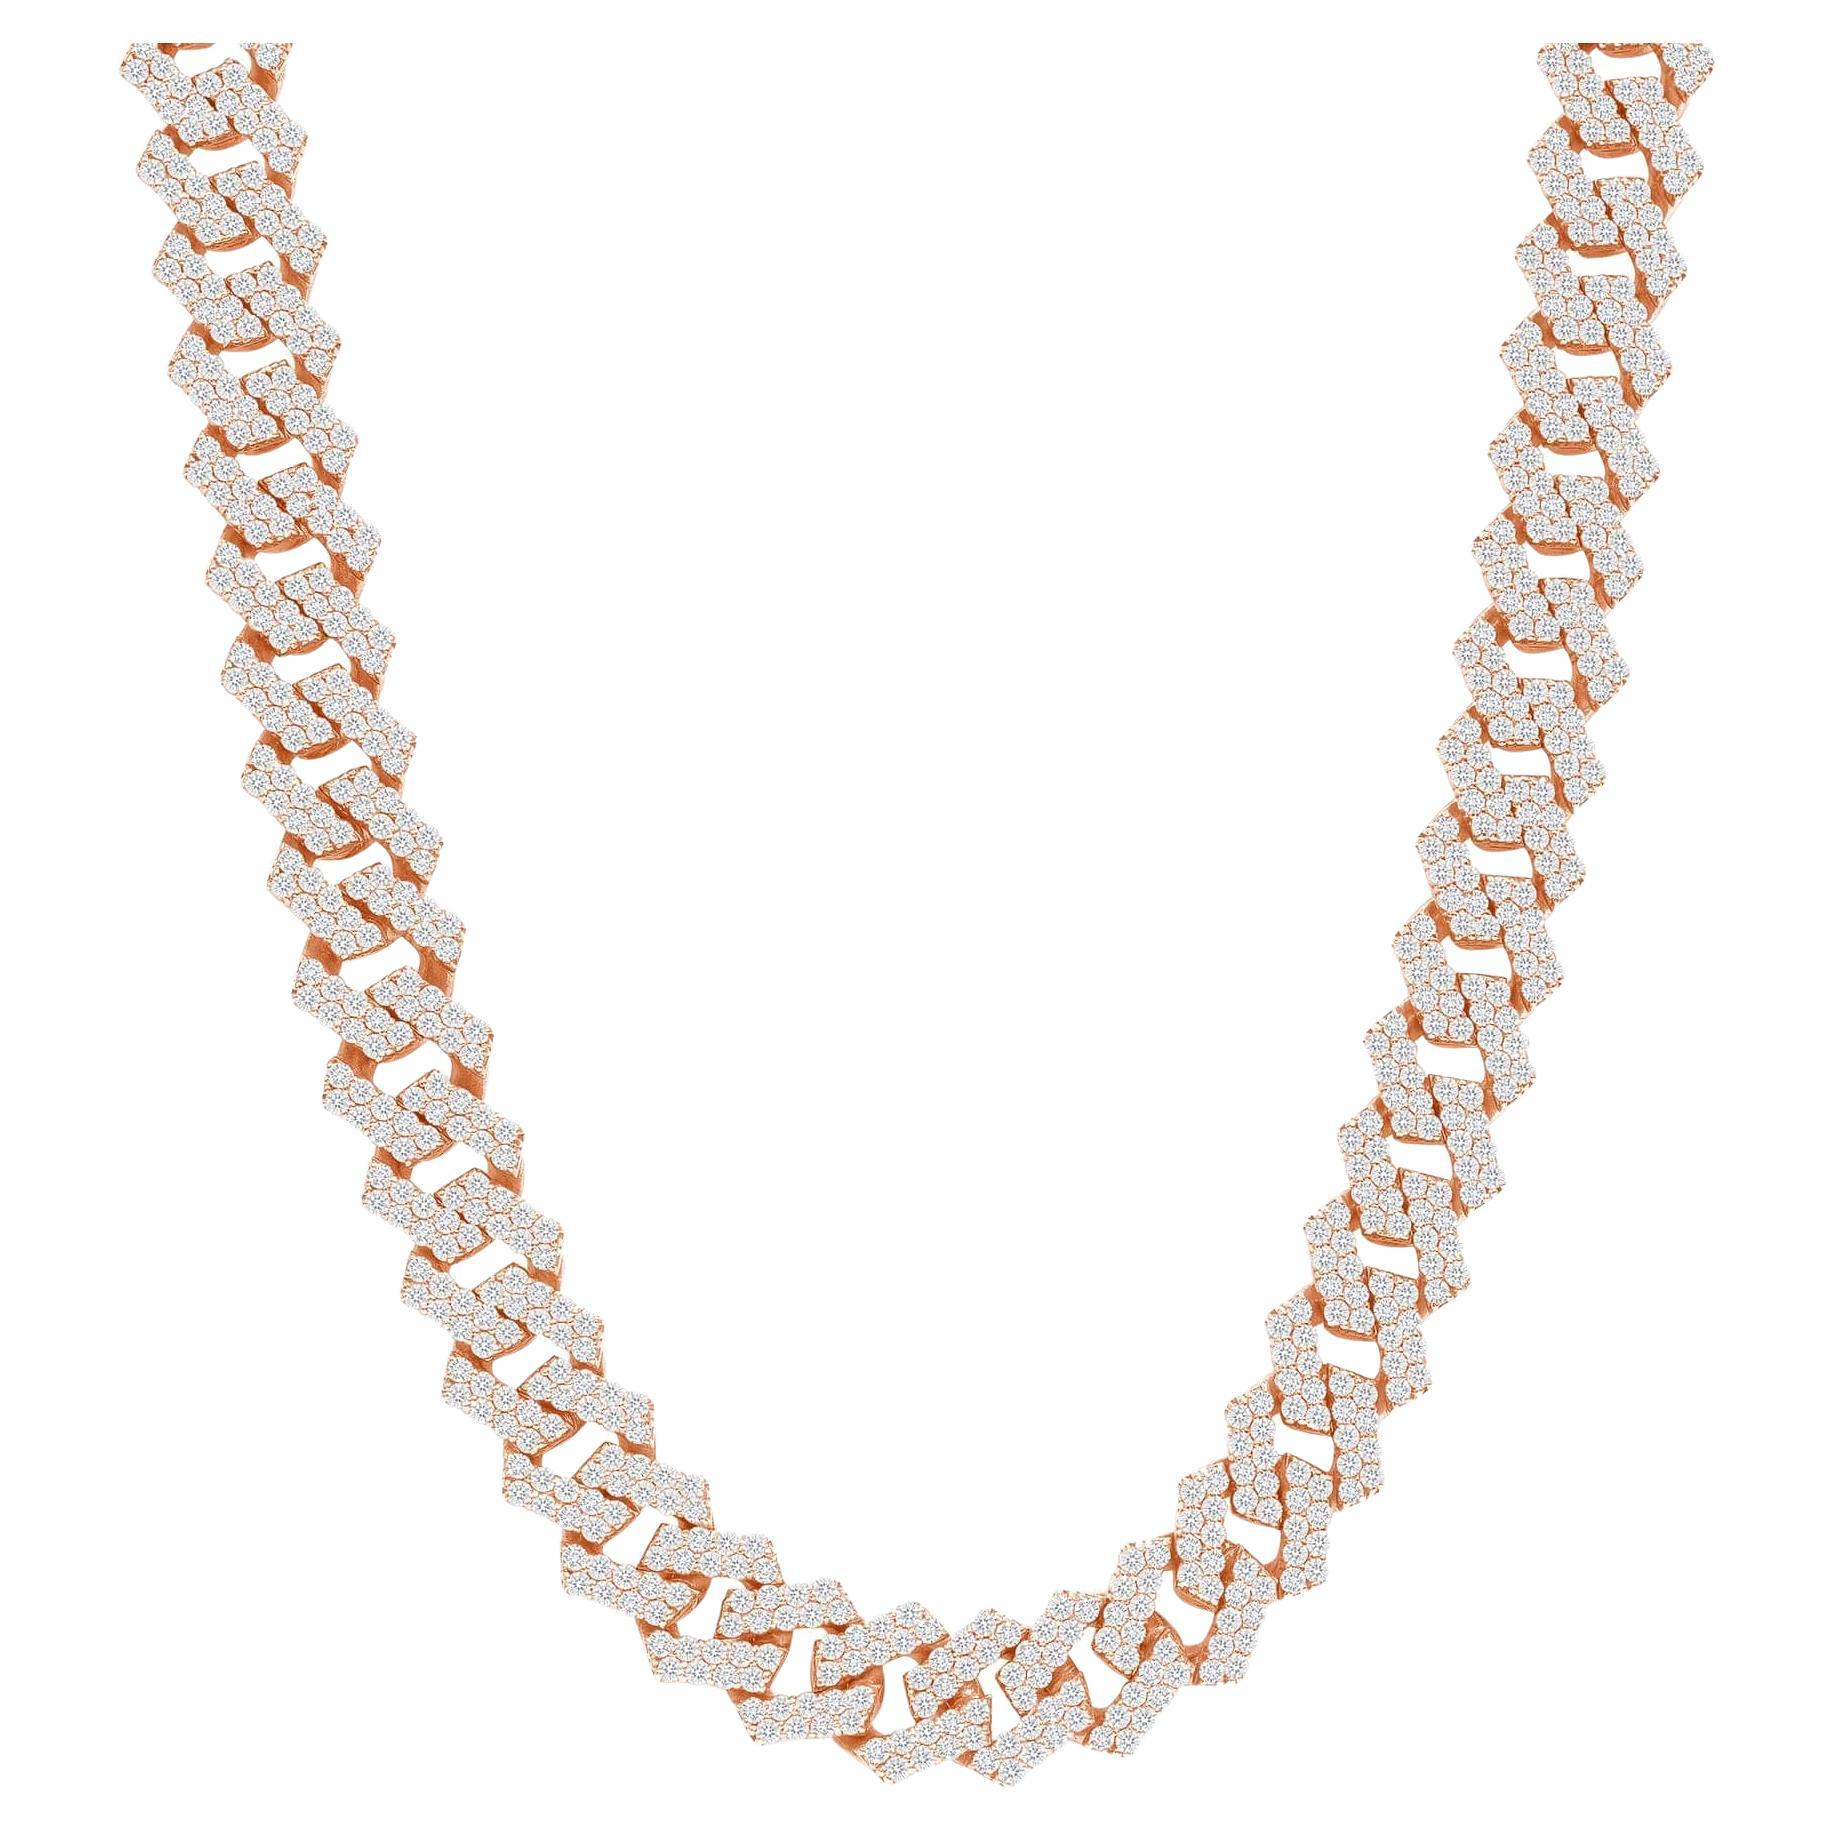 Necklace Information
Metal : 14k Gold
Total Grams : 272 grams
Diamond Cut : Round
Total Diamond Carats : 1 Carat
Chain Width : 15mm
Diamond Clarity : VS
Diamond Color : F-G
Length : 22
Color : Rose Gold, White Gold, Yellow Gold
 

JEWELRY CARE
Over